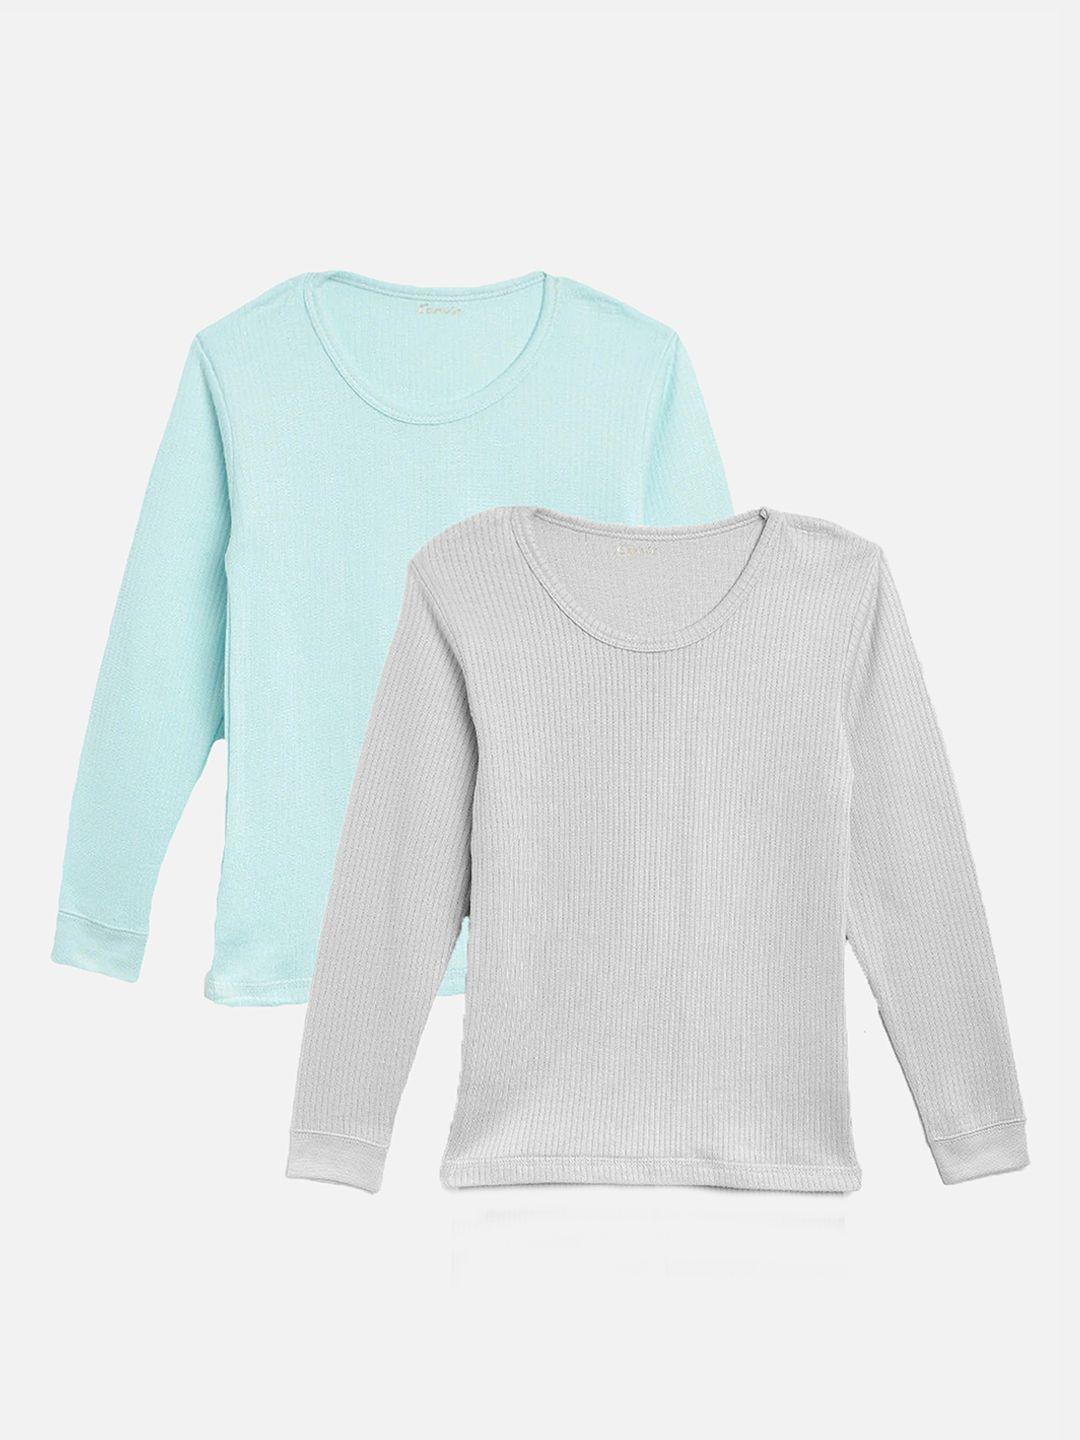 kanvin boys blue & grey pack of 2 solid thermal tops